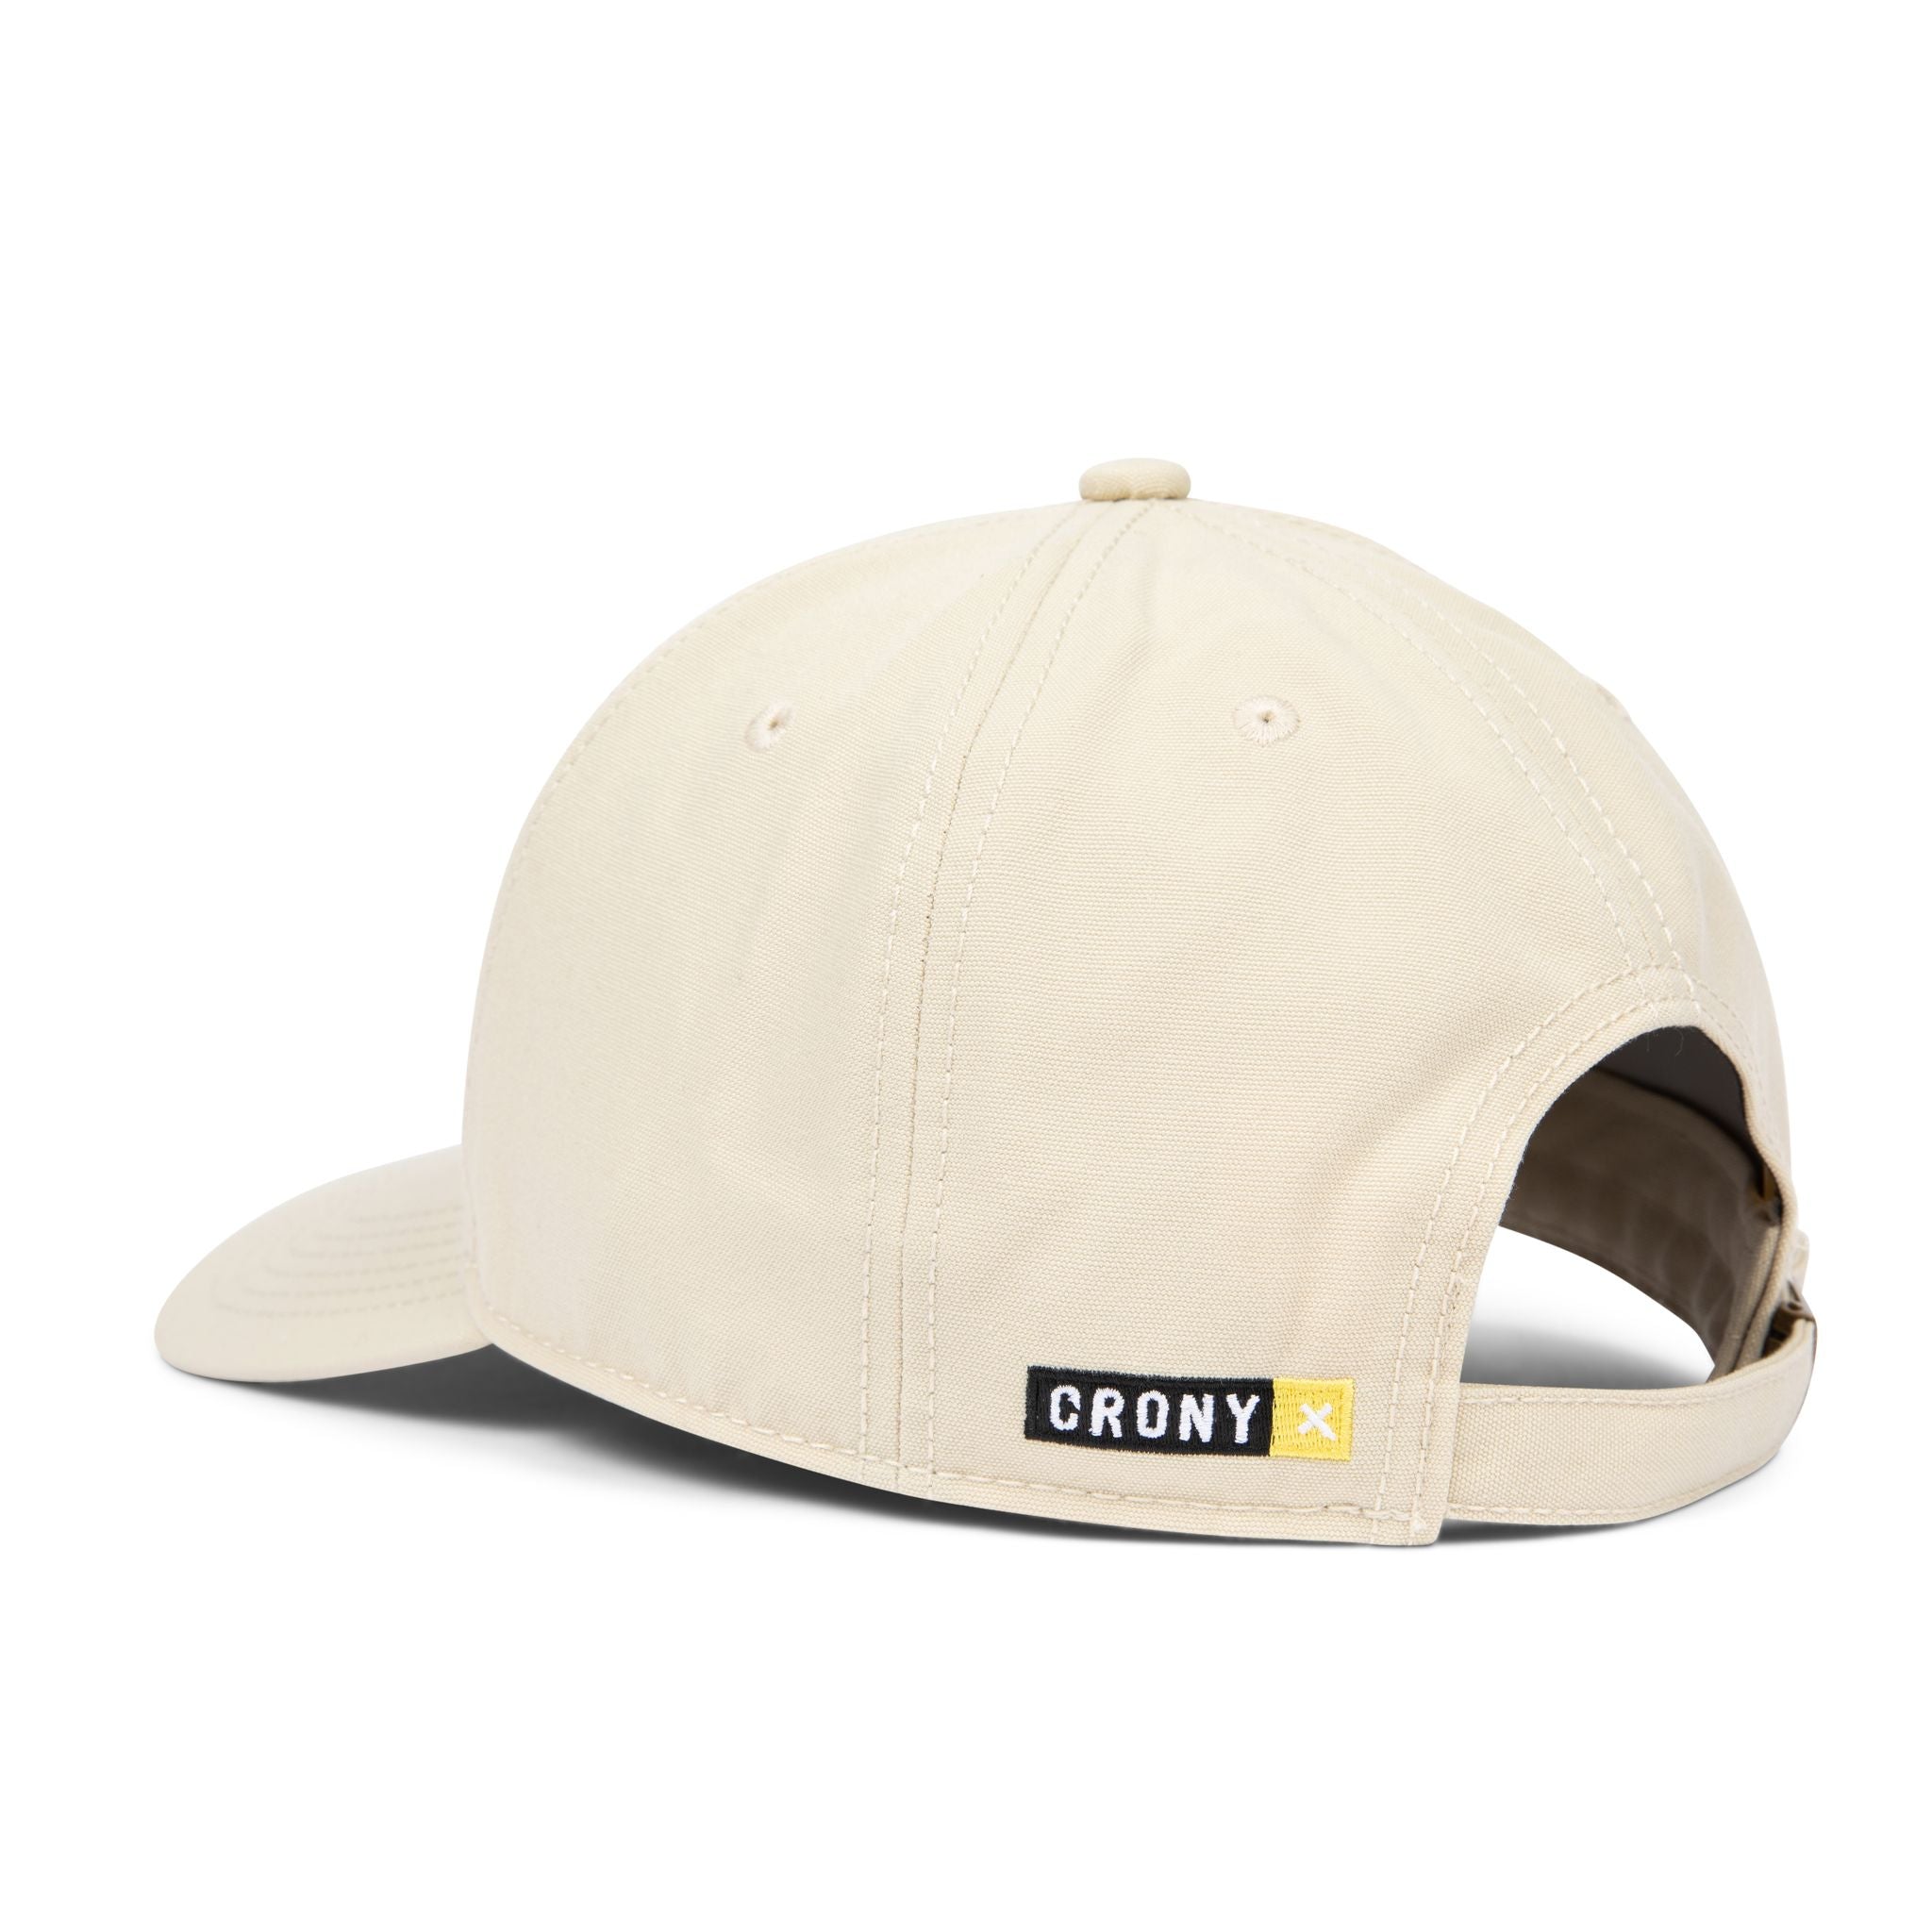 Do Not Pick Them - Recycled Dad Hat